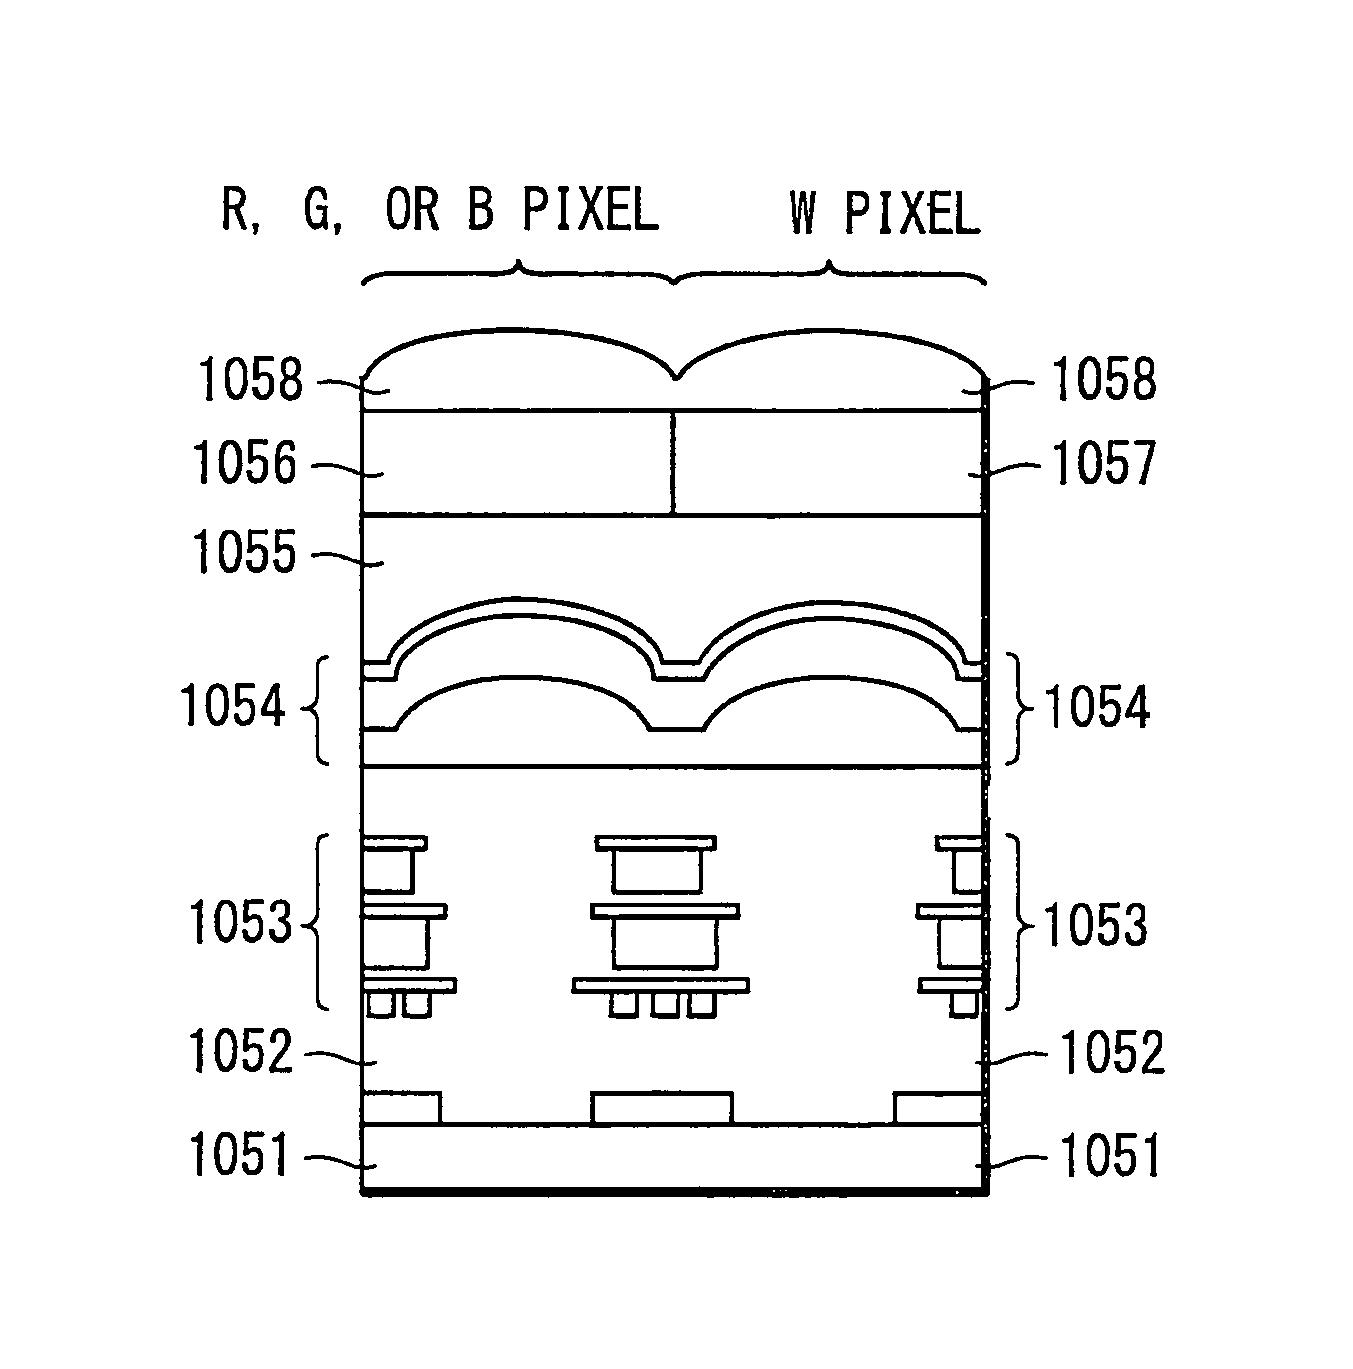 Solid-state imaging device, method of manufacturing the same, and camera